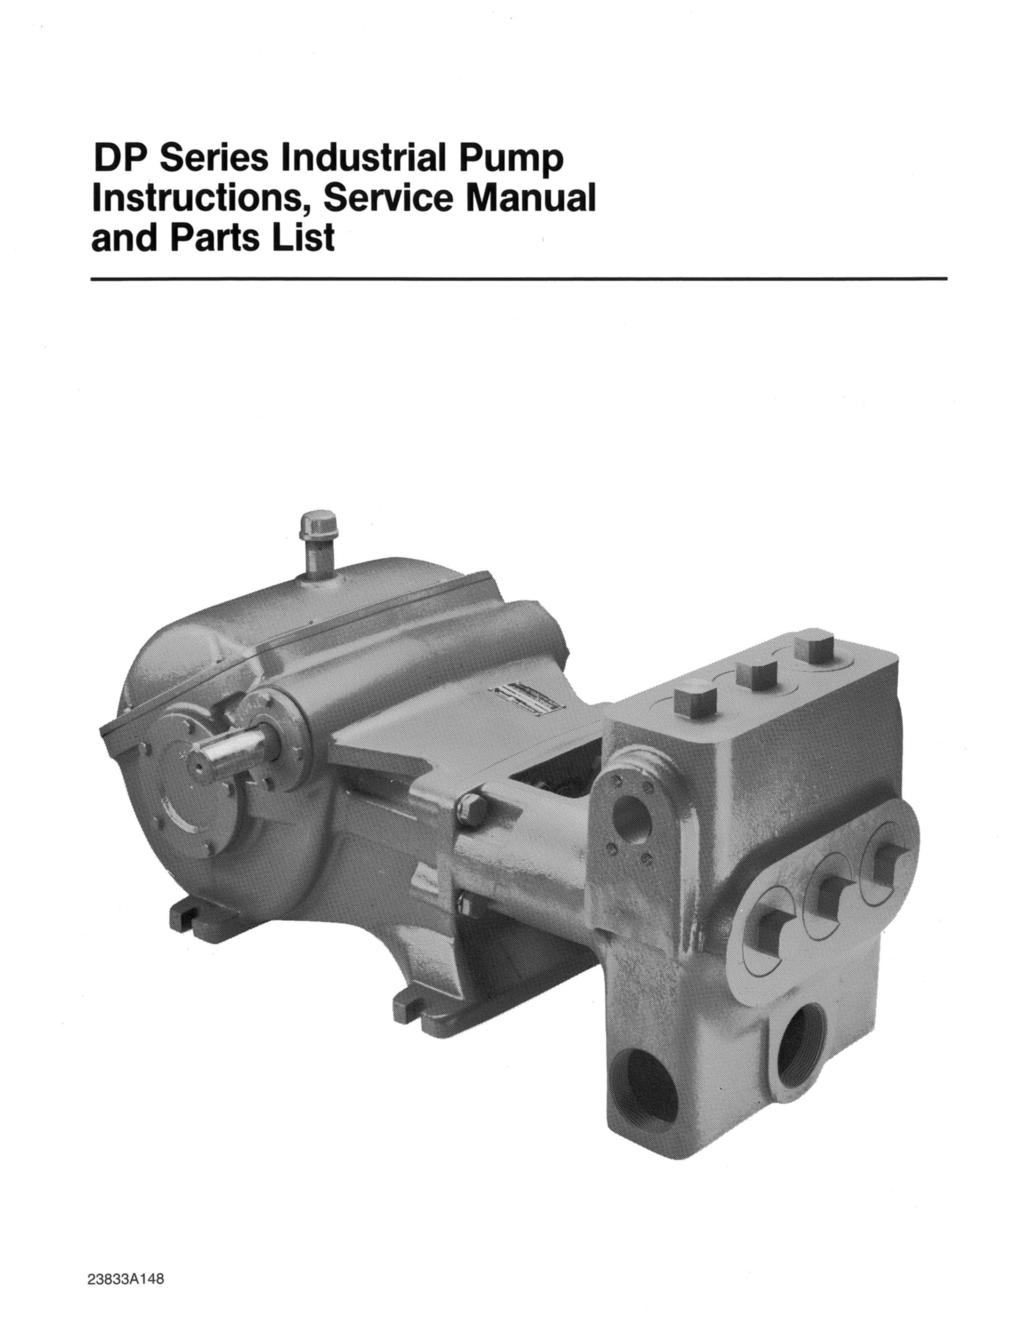 DP SERIES INDUSTRIAL PUMP INSTALLATION AND SERVICE MANUAL NOTE!